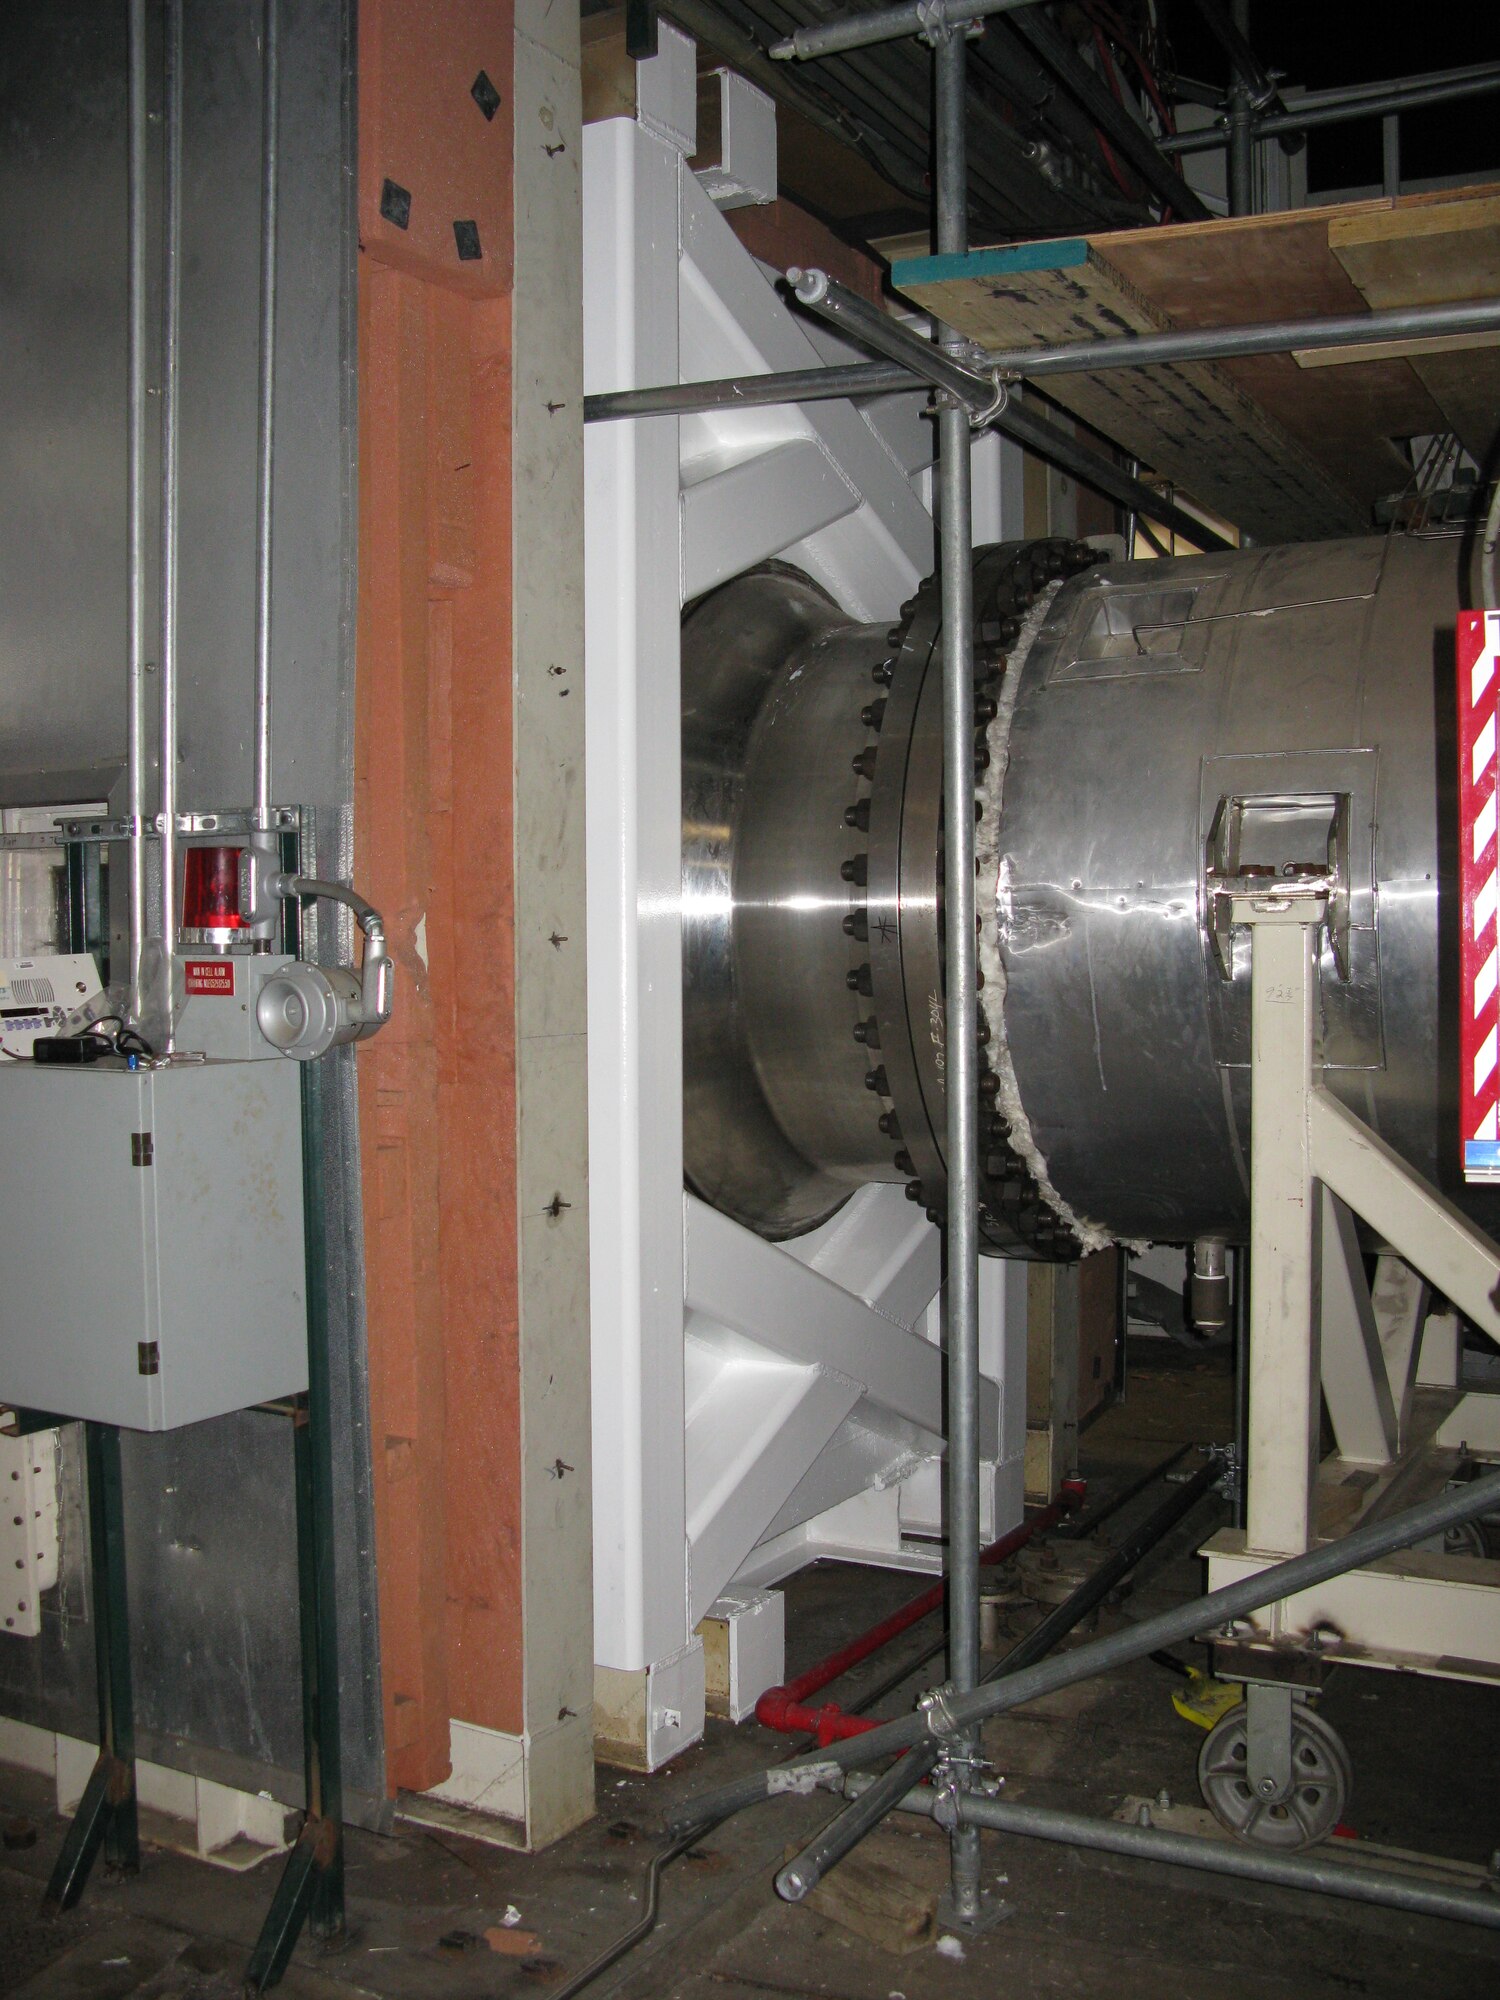 The plenum for the AEDC T-11 engine test cell at Arnold Air Force Base was modified by installing a spool piece that enabled the installation of a plenum apparatus and provided the interface for the plug-in modules. Pictured is an outside view of the plenum modification. (AEDC photo)